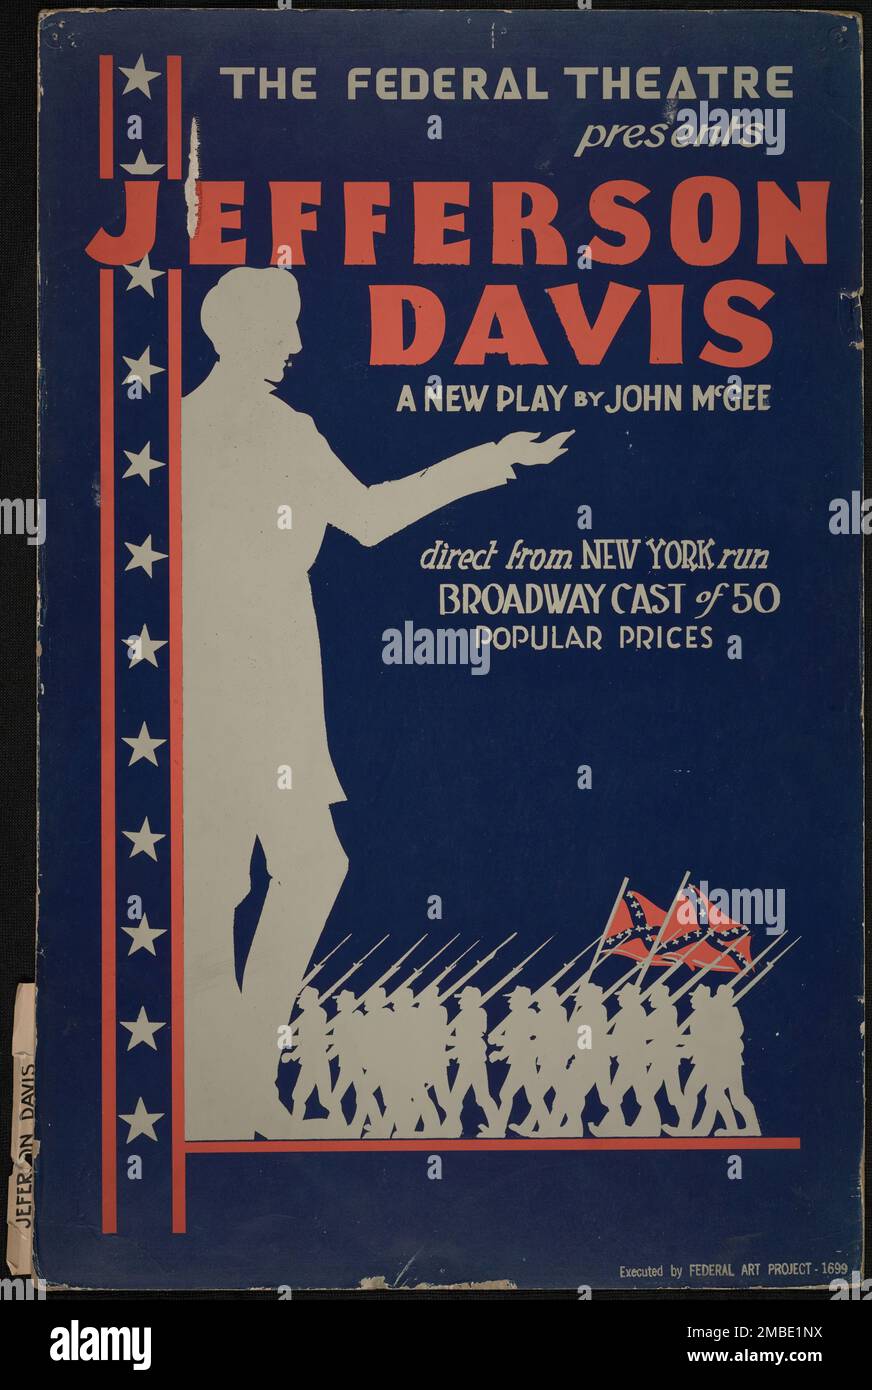 Jefferson Davis, [193-]. 'The Federal Theatre Presents - Jefferson Davis - A New Play by John McGee - direct from New York run - Broadway Cast of 50'. Theatre production about the President of the Confederate States of America during the civil war. The Federal Theatre Project, created by the U.S. Works Progress Administration in 1935, was designed to conserve and develop the skills of theater workers, re-employ them on public relief, and to bring theater to thousands in the United States who had never before seen live theatrical performances. Stock Photo